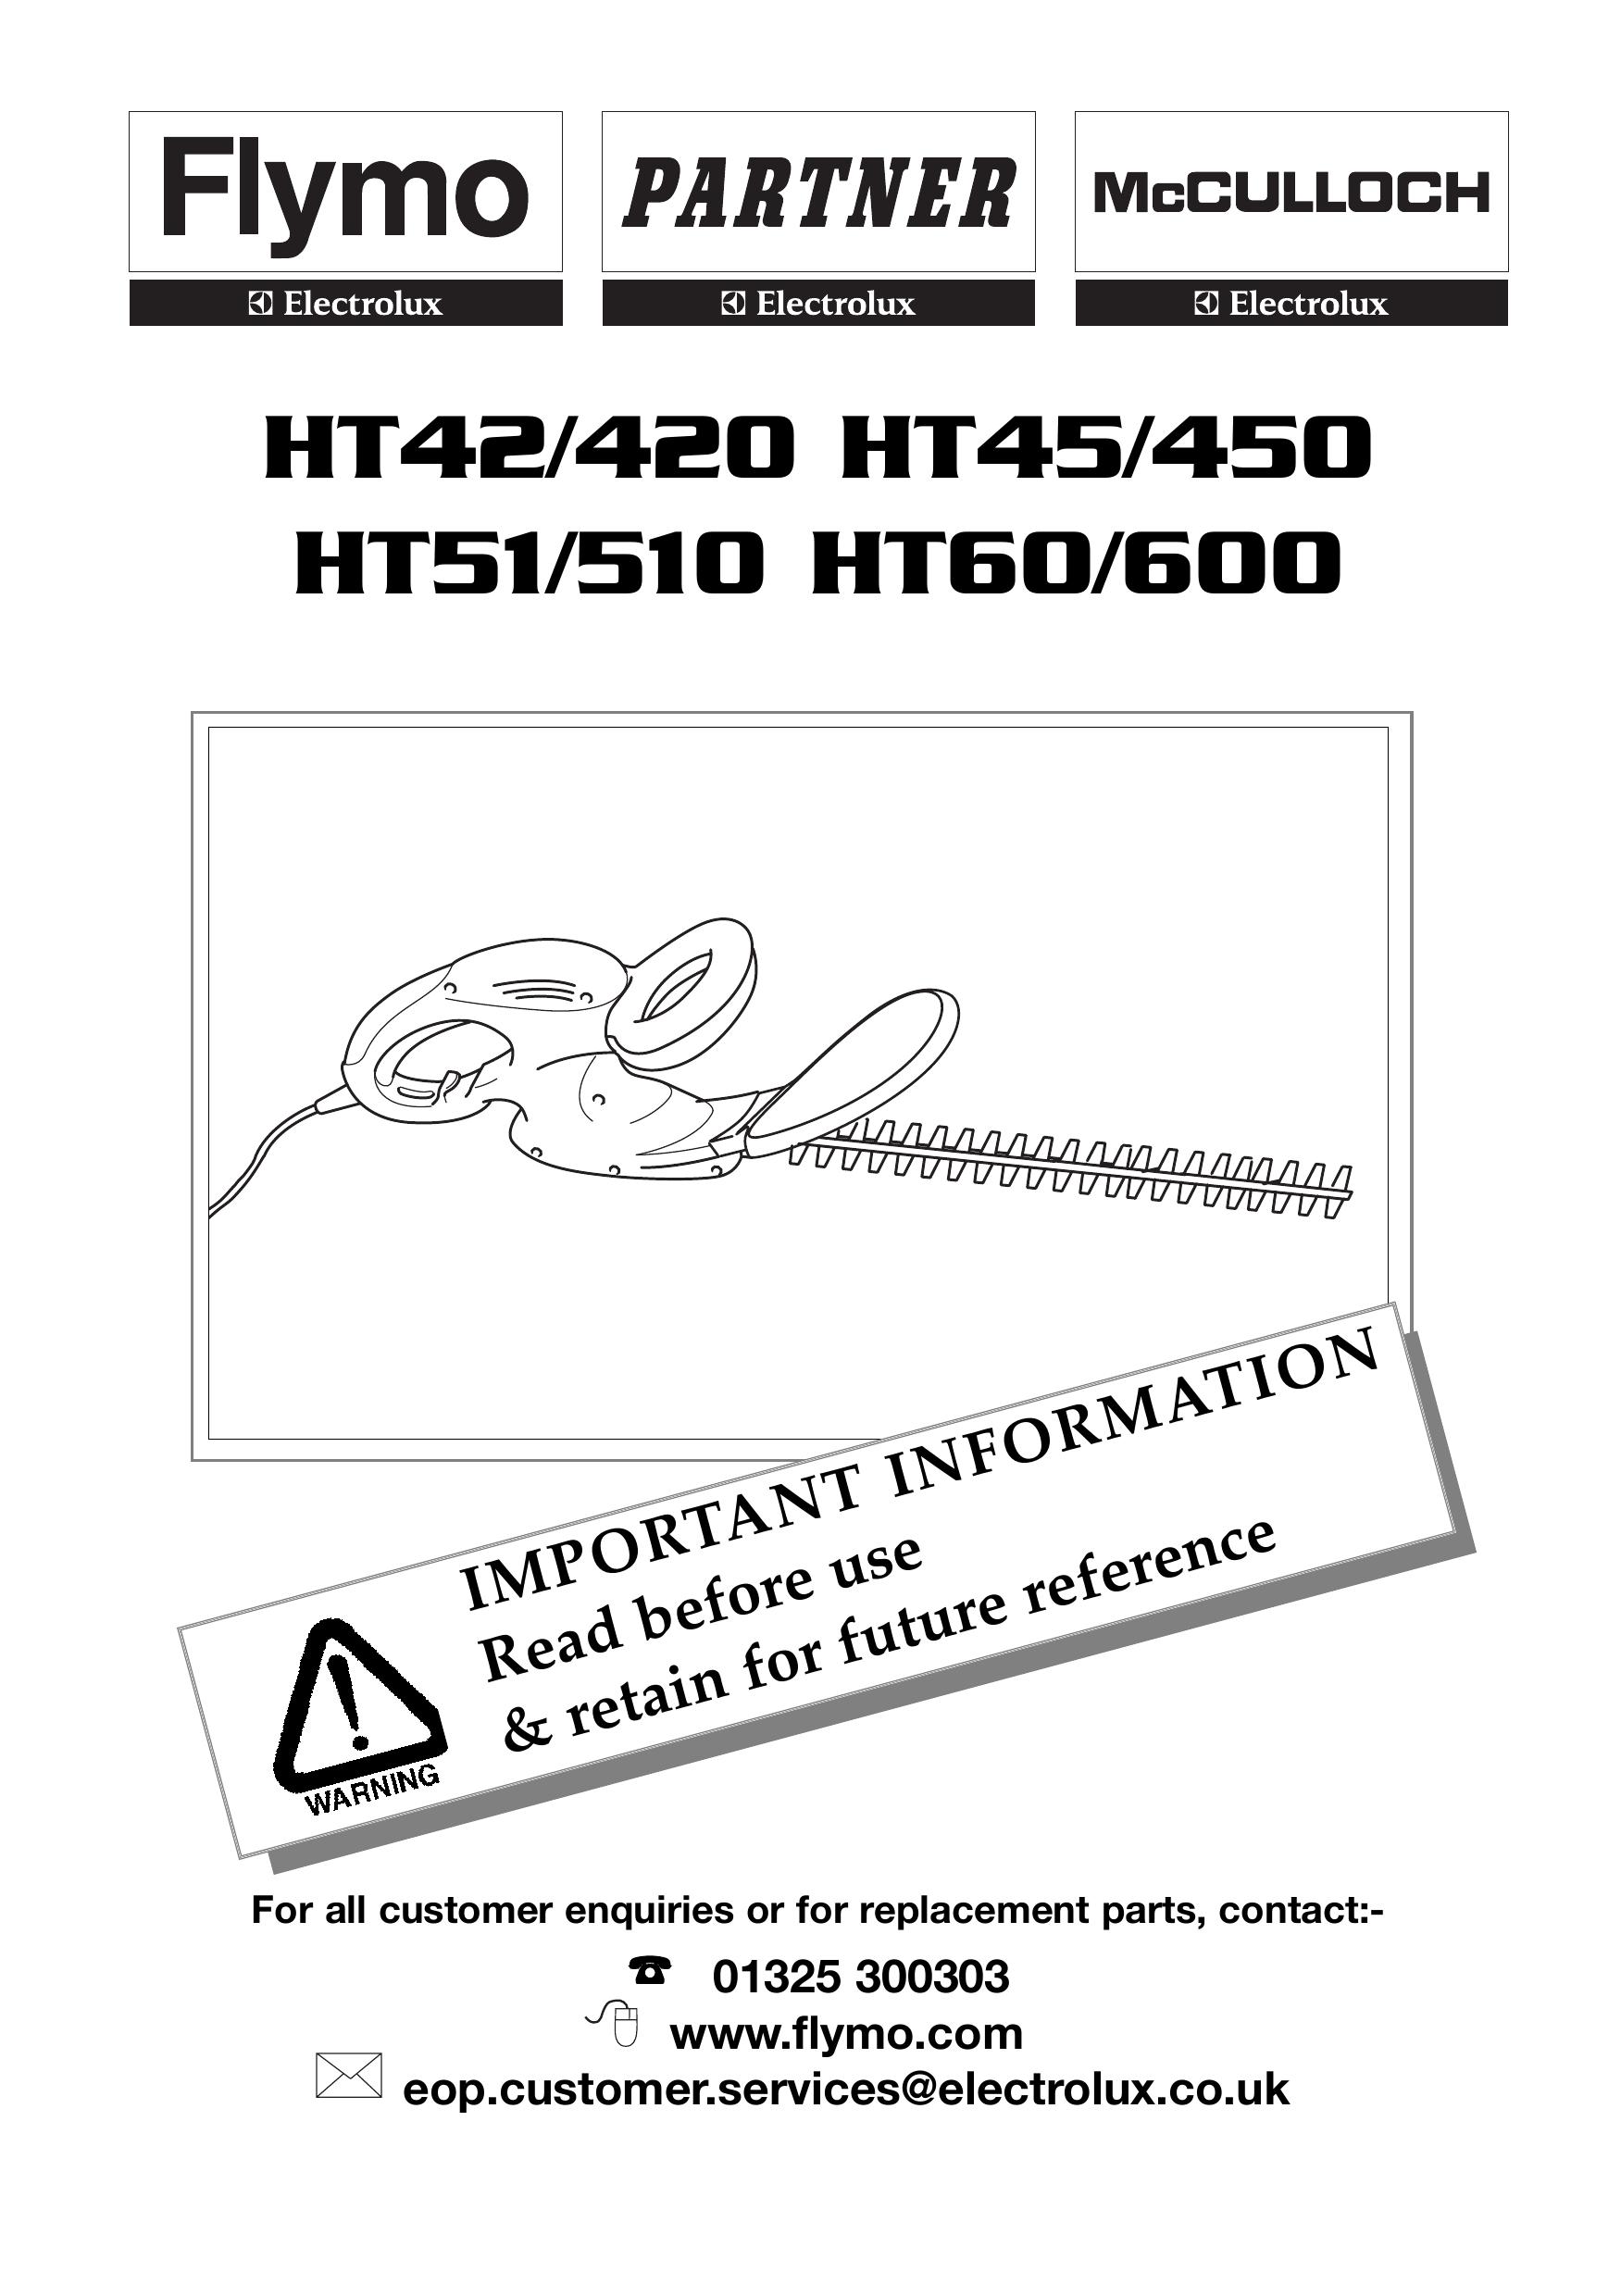 Flymo HT45 Chainsaw User Manual